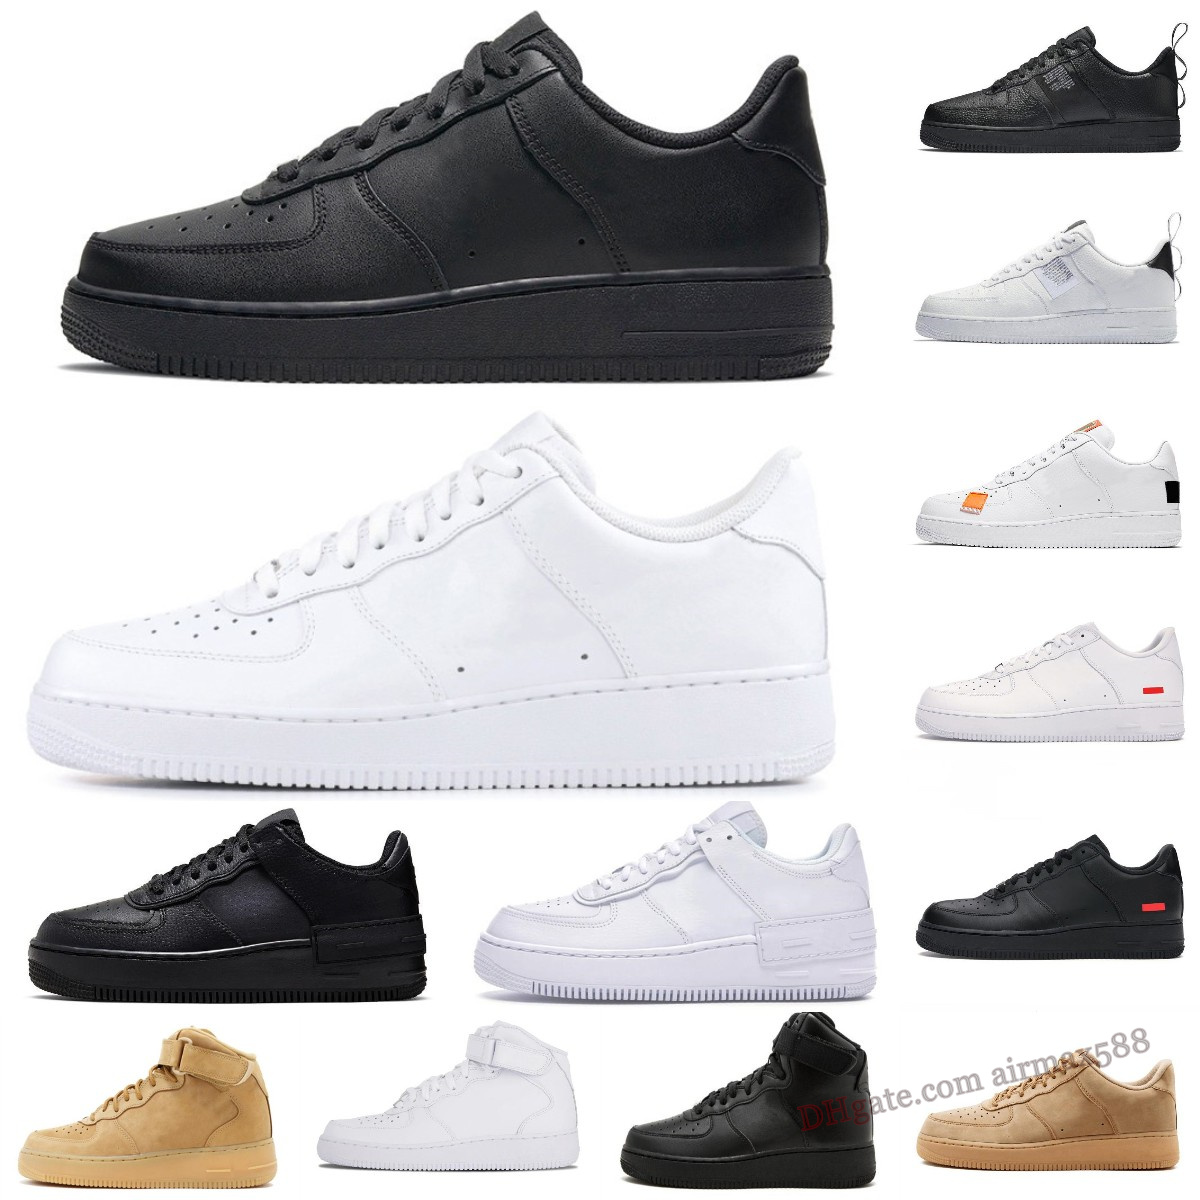 

Skateboard Shoes Casaul Shoe airforce 1 low 1s Sports Sneakers All White Black Wheat Running 022 Ers Outdoor Men Low Unisex air Forces Classic AF 1 07 Knit Euro Airs High, #006